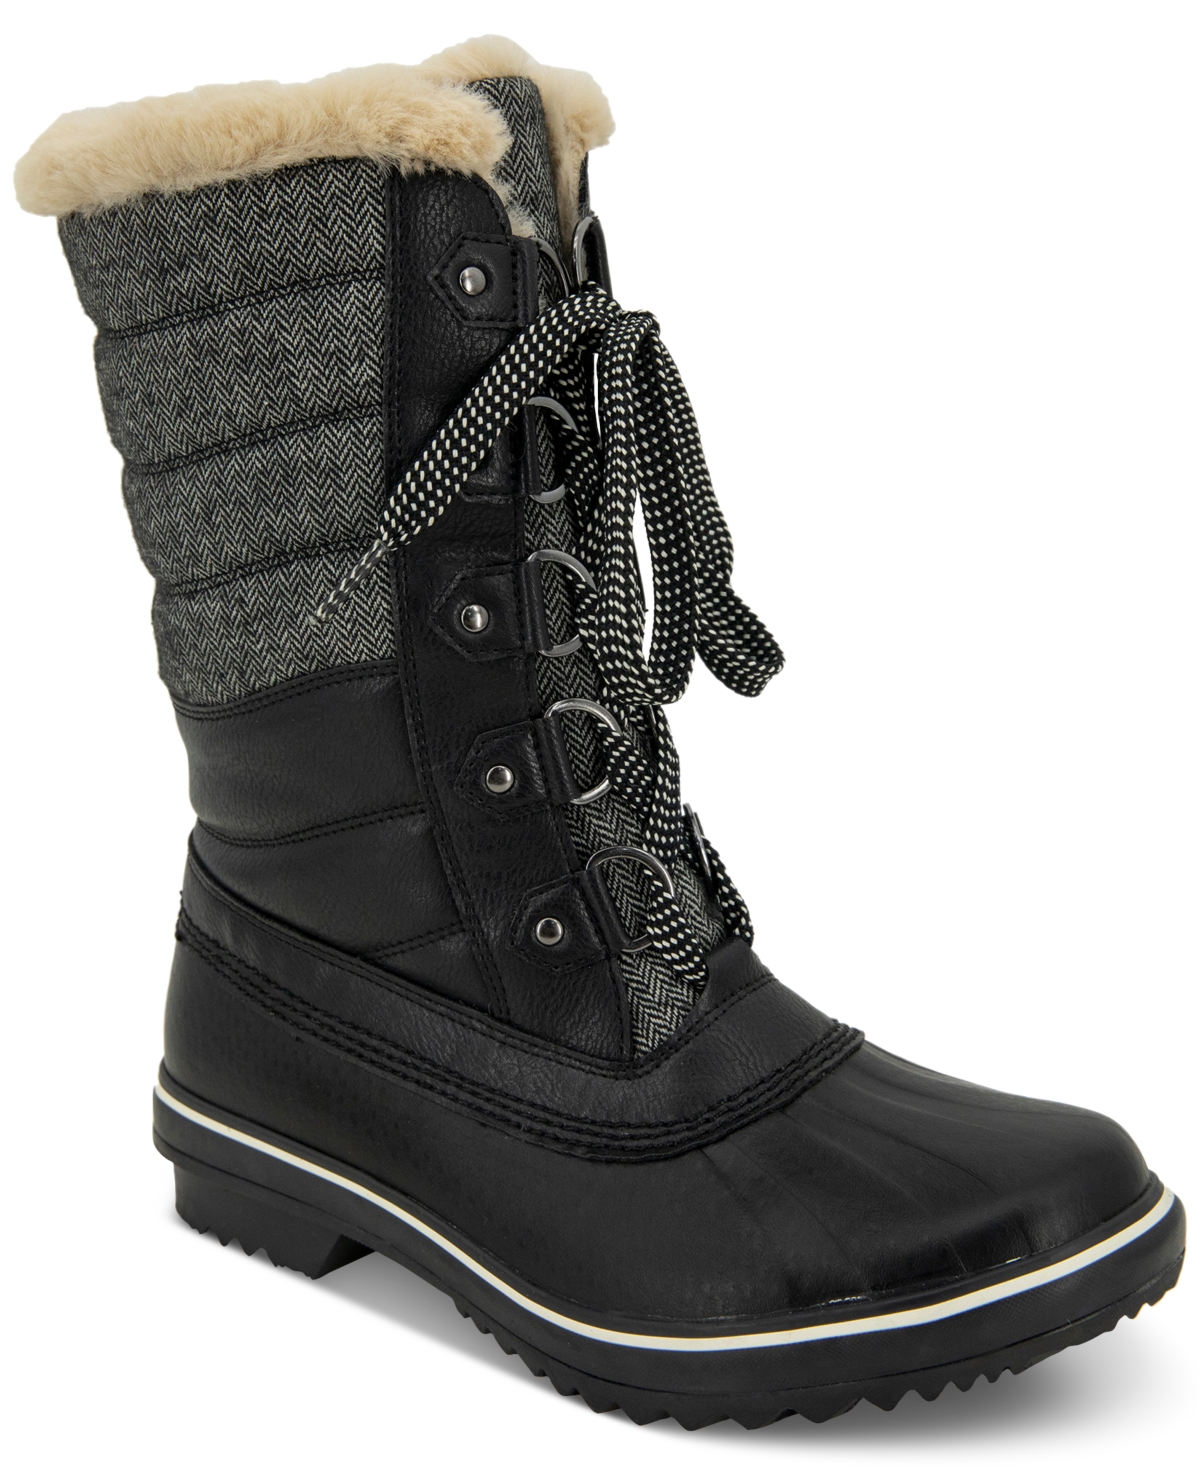 Jbu Women's Siberia Waterproof Lace-Up Quilted Cold-Weather Boots Women's Shoes